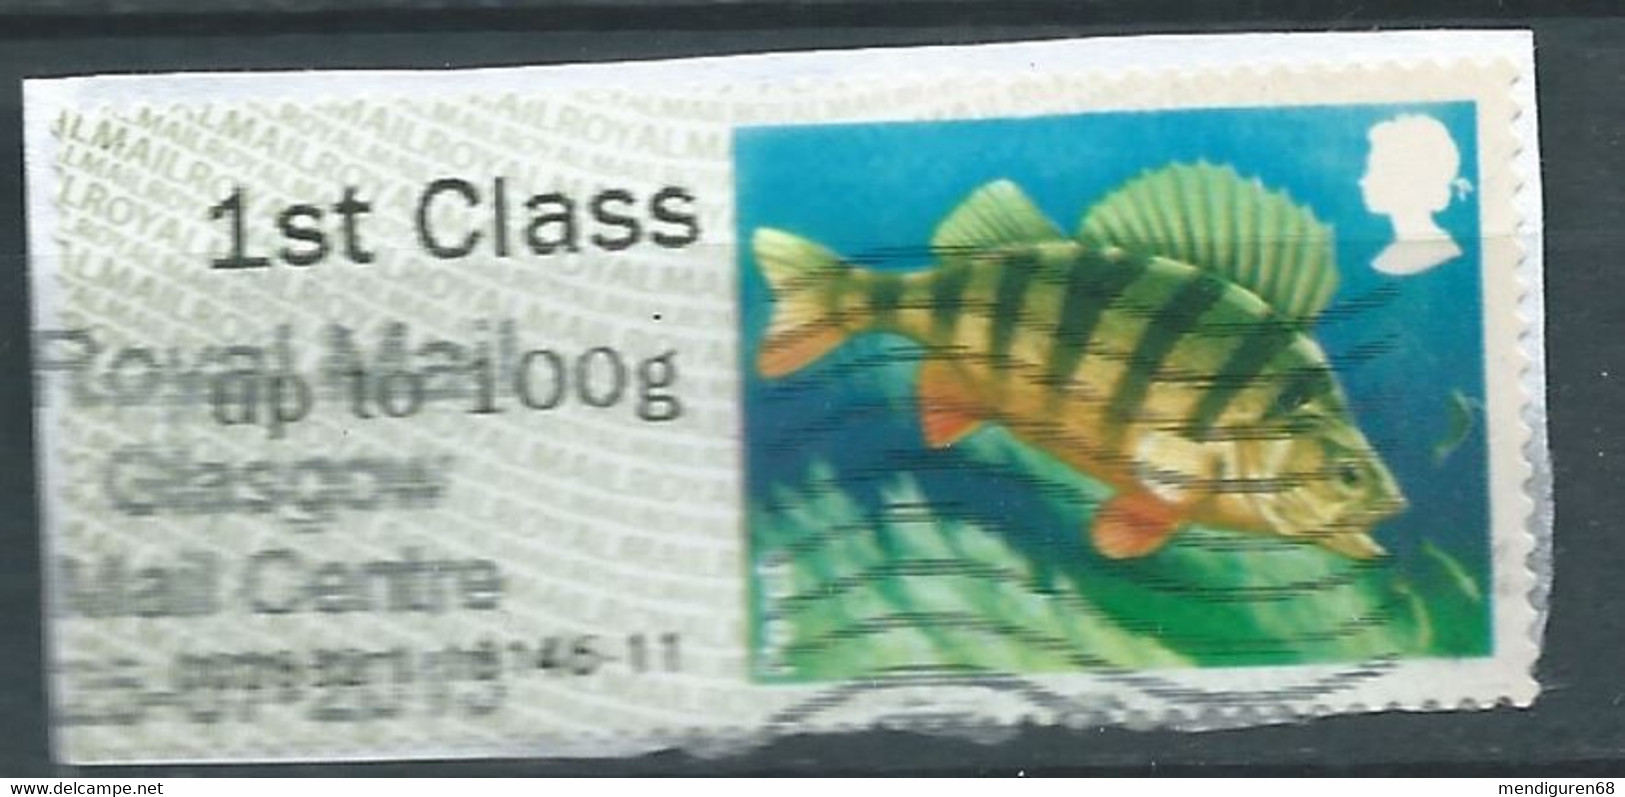 GROSBRITANNIEN GRANDE BRETAGNE GB 2013 POST&GO LAKES:PERCH 1ST CLASS Up To 100g USED ON PAPER SG FS65 MI ATM 52 YT TD60 - Post & Go Stamps